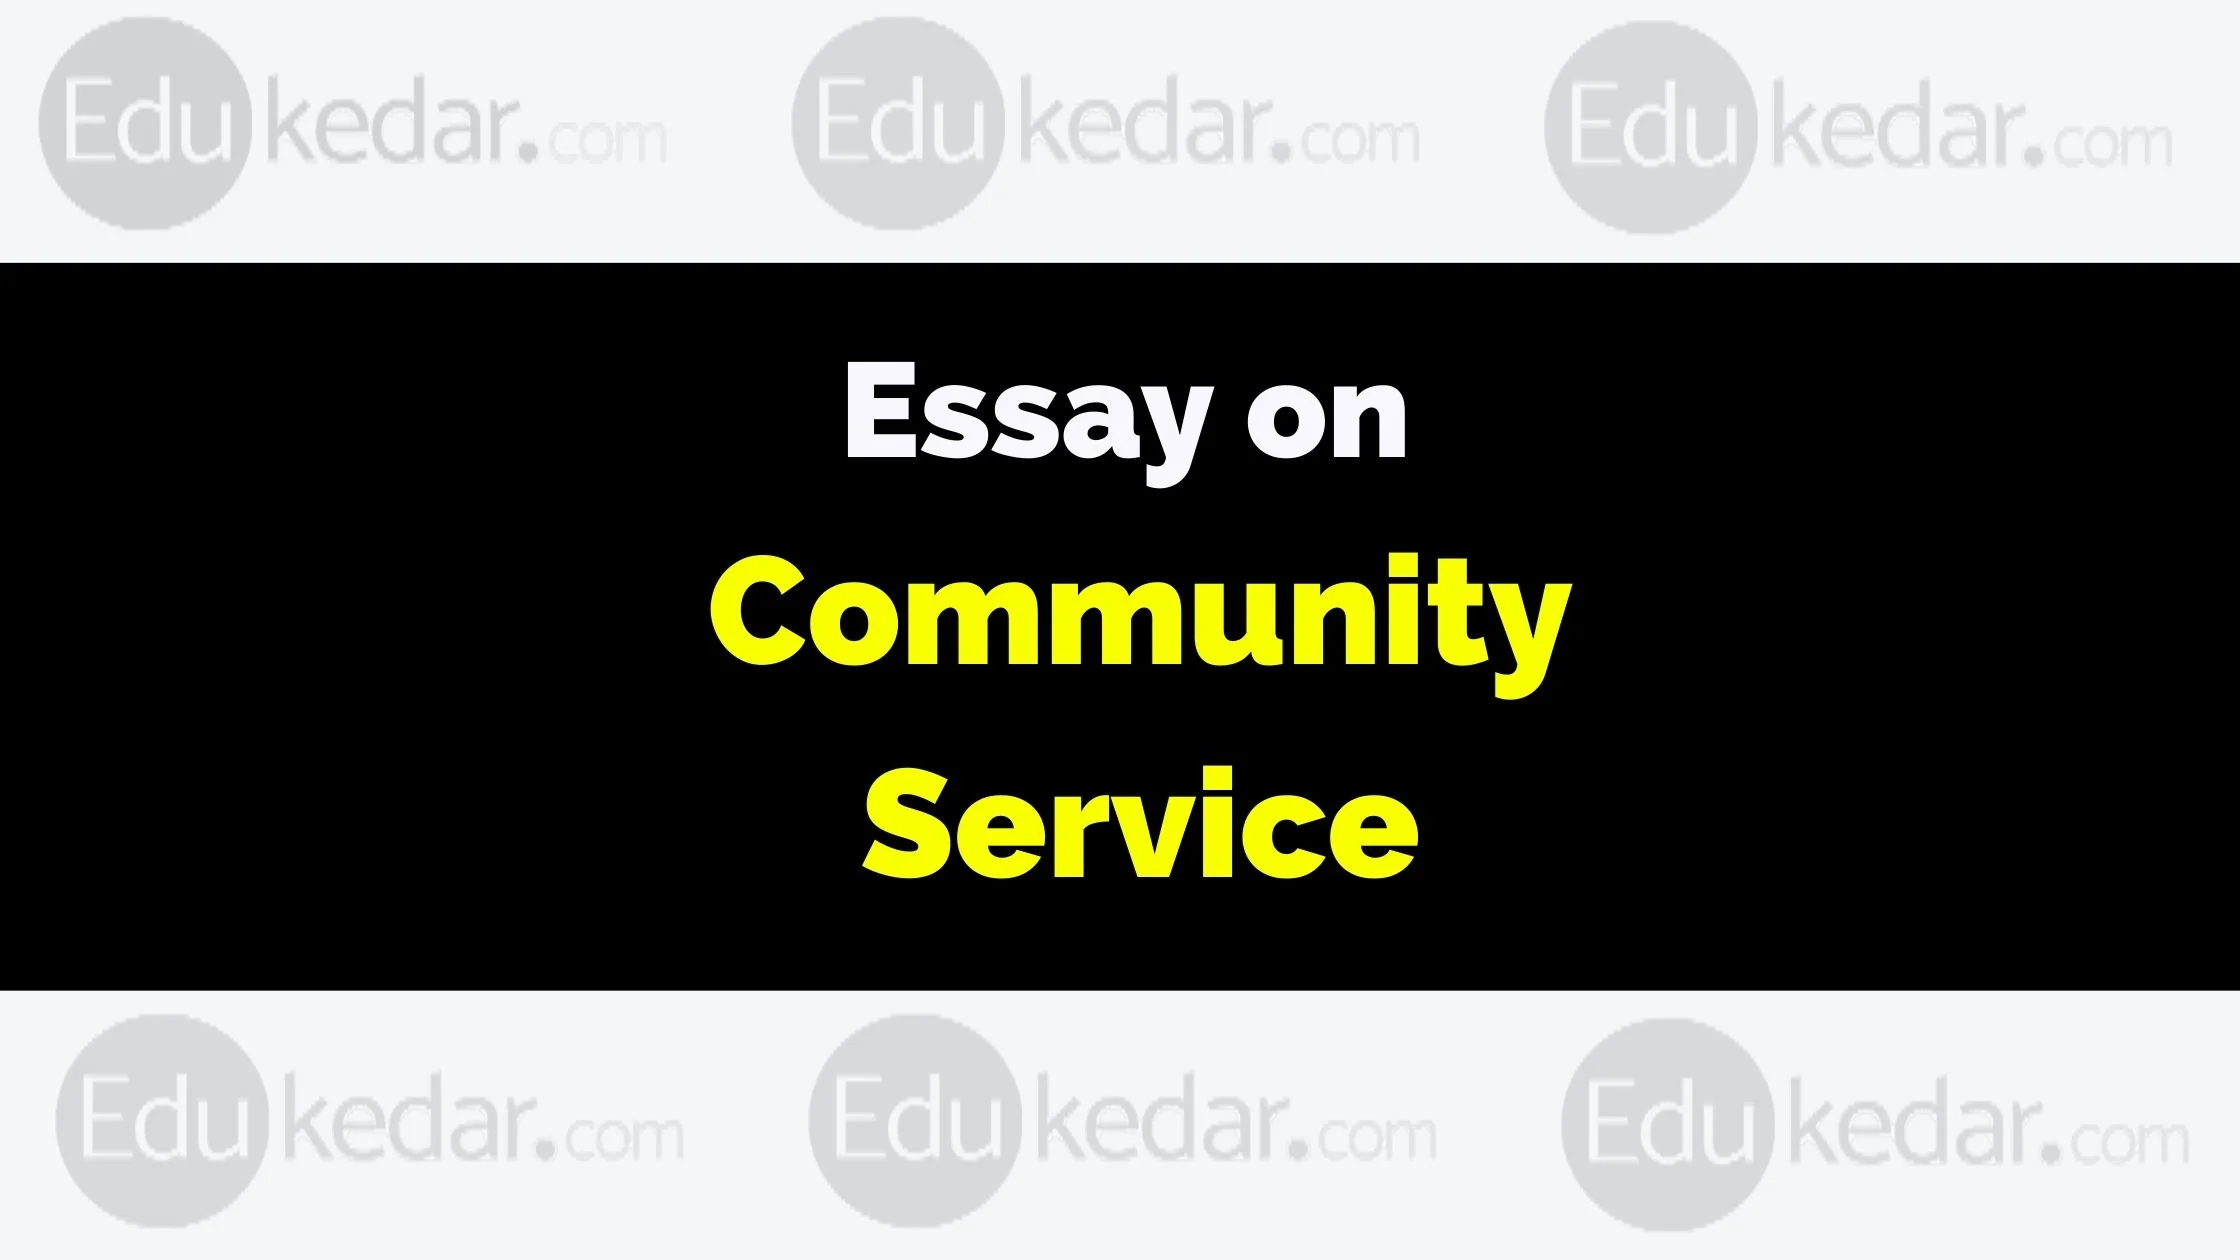 write an essay on community service for students